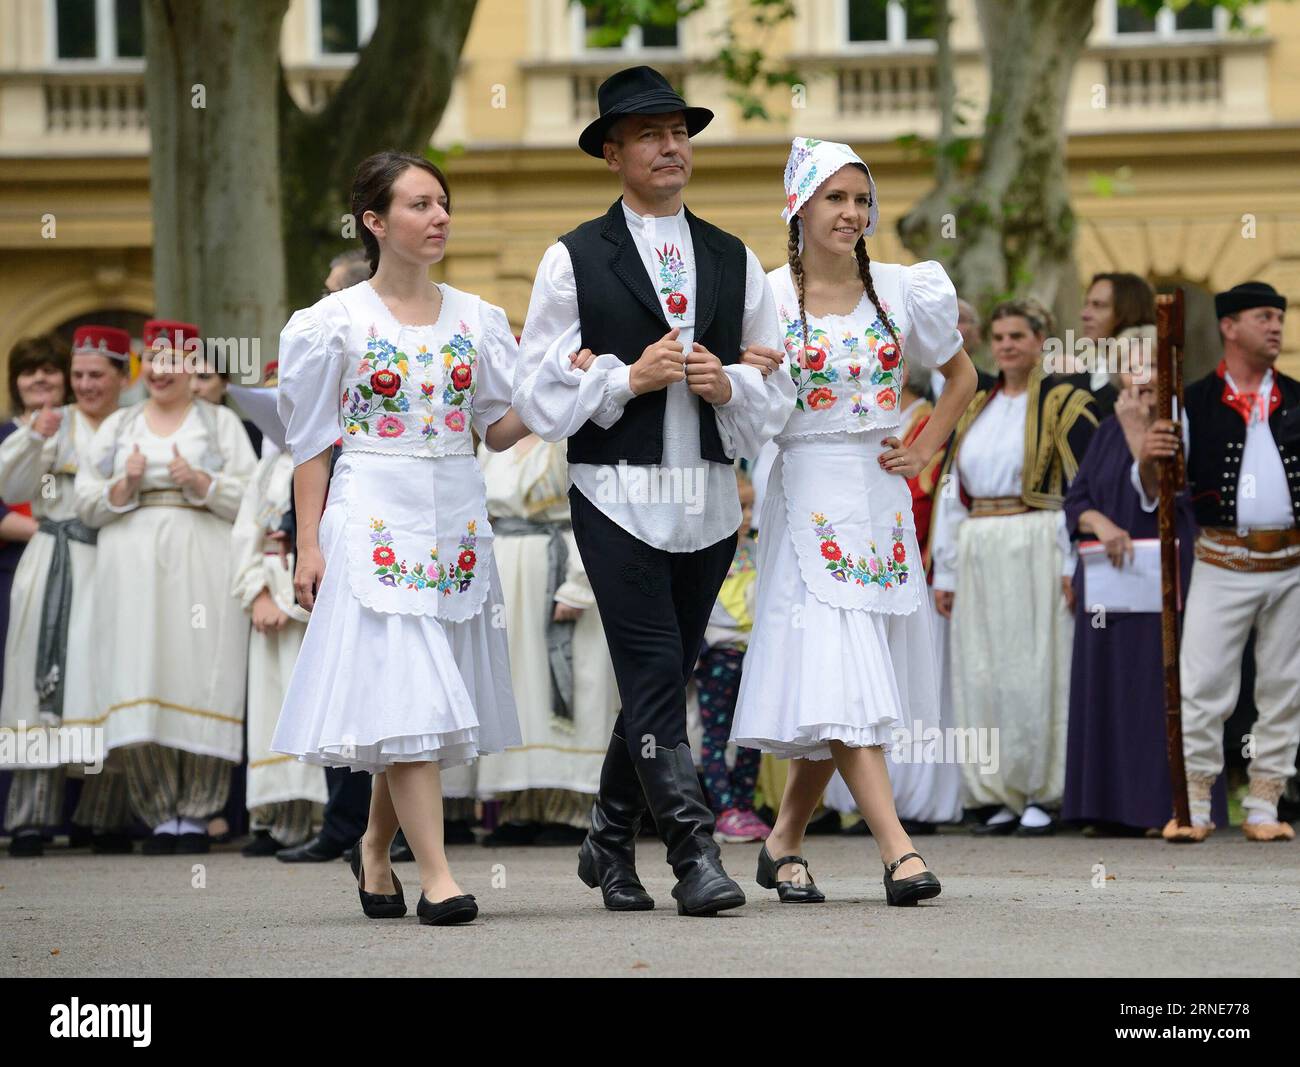 (160612) -- ZAGREB, June 12, 2016 -- Participants dressed in Hungarian folk costumes perform during the annual Day of National Minorities at Zrinjevac Park in Zagreb, Croatia, June 12, 2016. Members of 18 national minorities settled in Croatia presented their traditional customs, food and folklore to tourists and locals on Sunday. ) CROATIA-ZAGREB-NATIONAL MINORITY DAY MisoxLisanin PUBLICATIONxNOTxINxCHN   160612 Zagreb June 12 2016 Participants Dressed in Hungarian Folk Costumes perform during The Annual Day of National Minorities AT Zrinjevac Park in Zagreb Croatia June 12 2016 Members of 18 Stock Photo